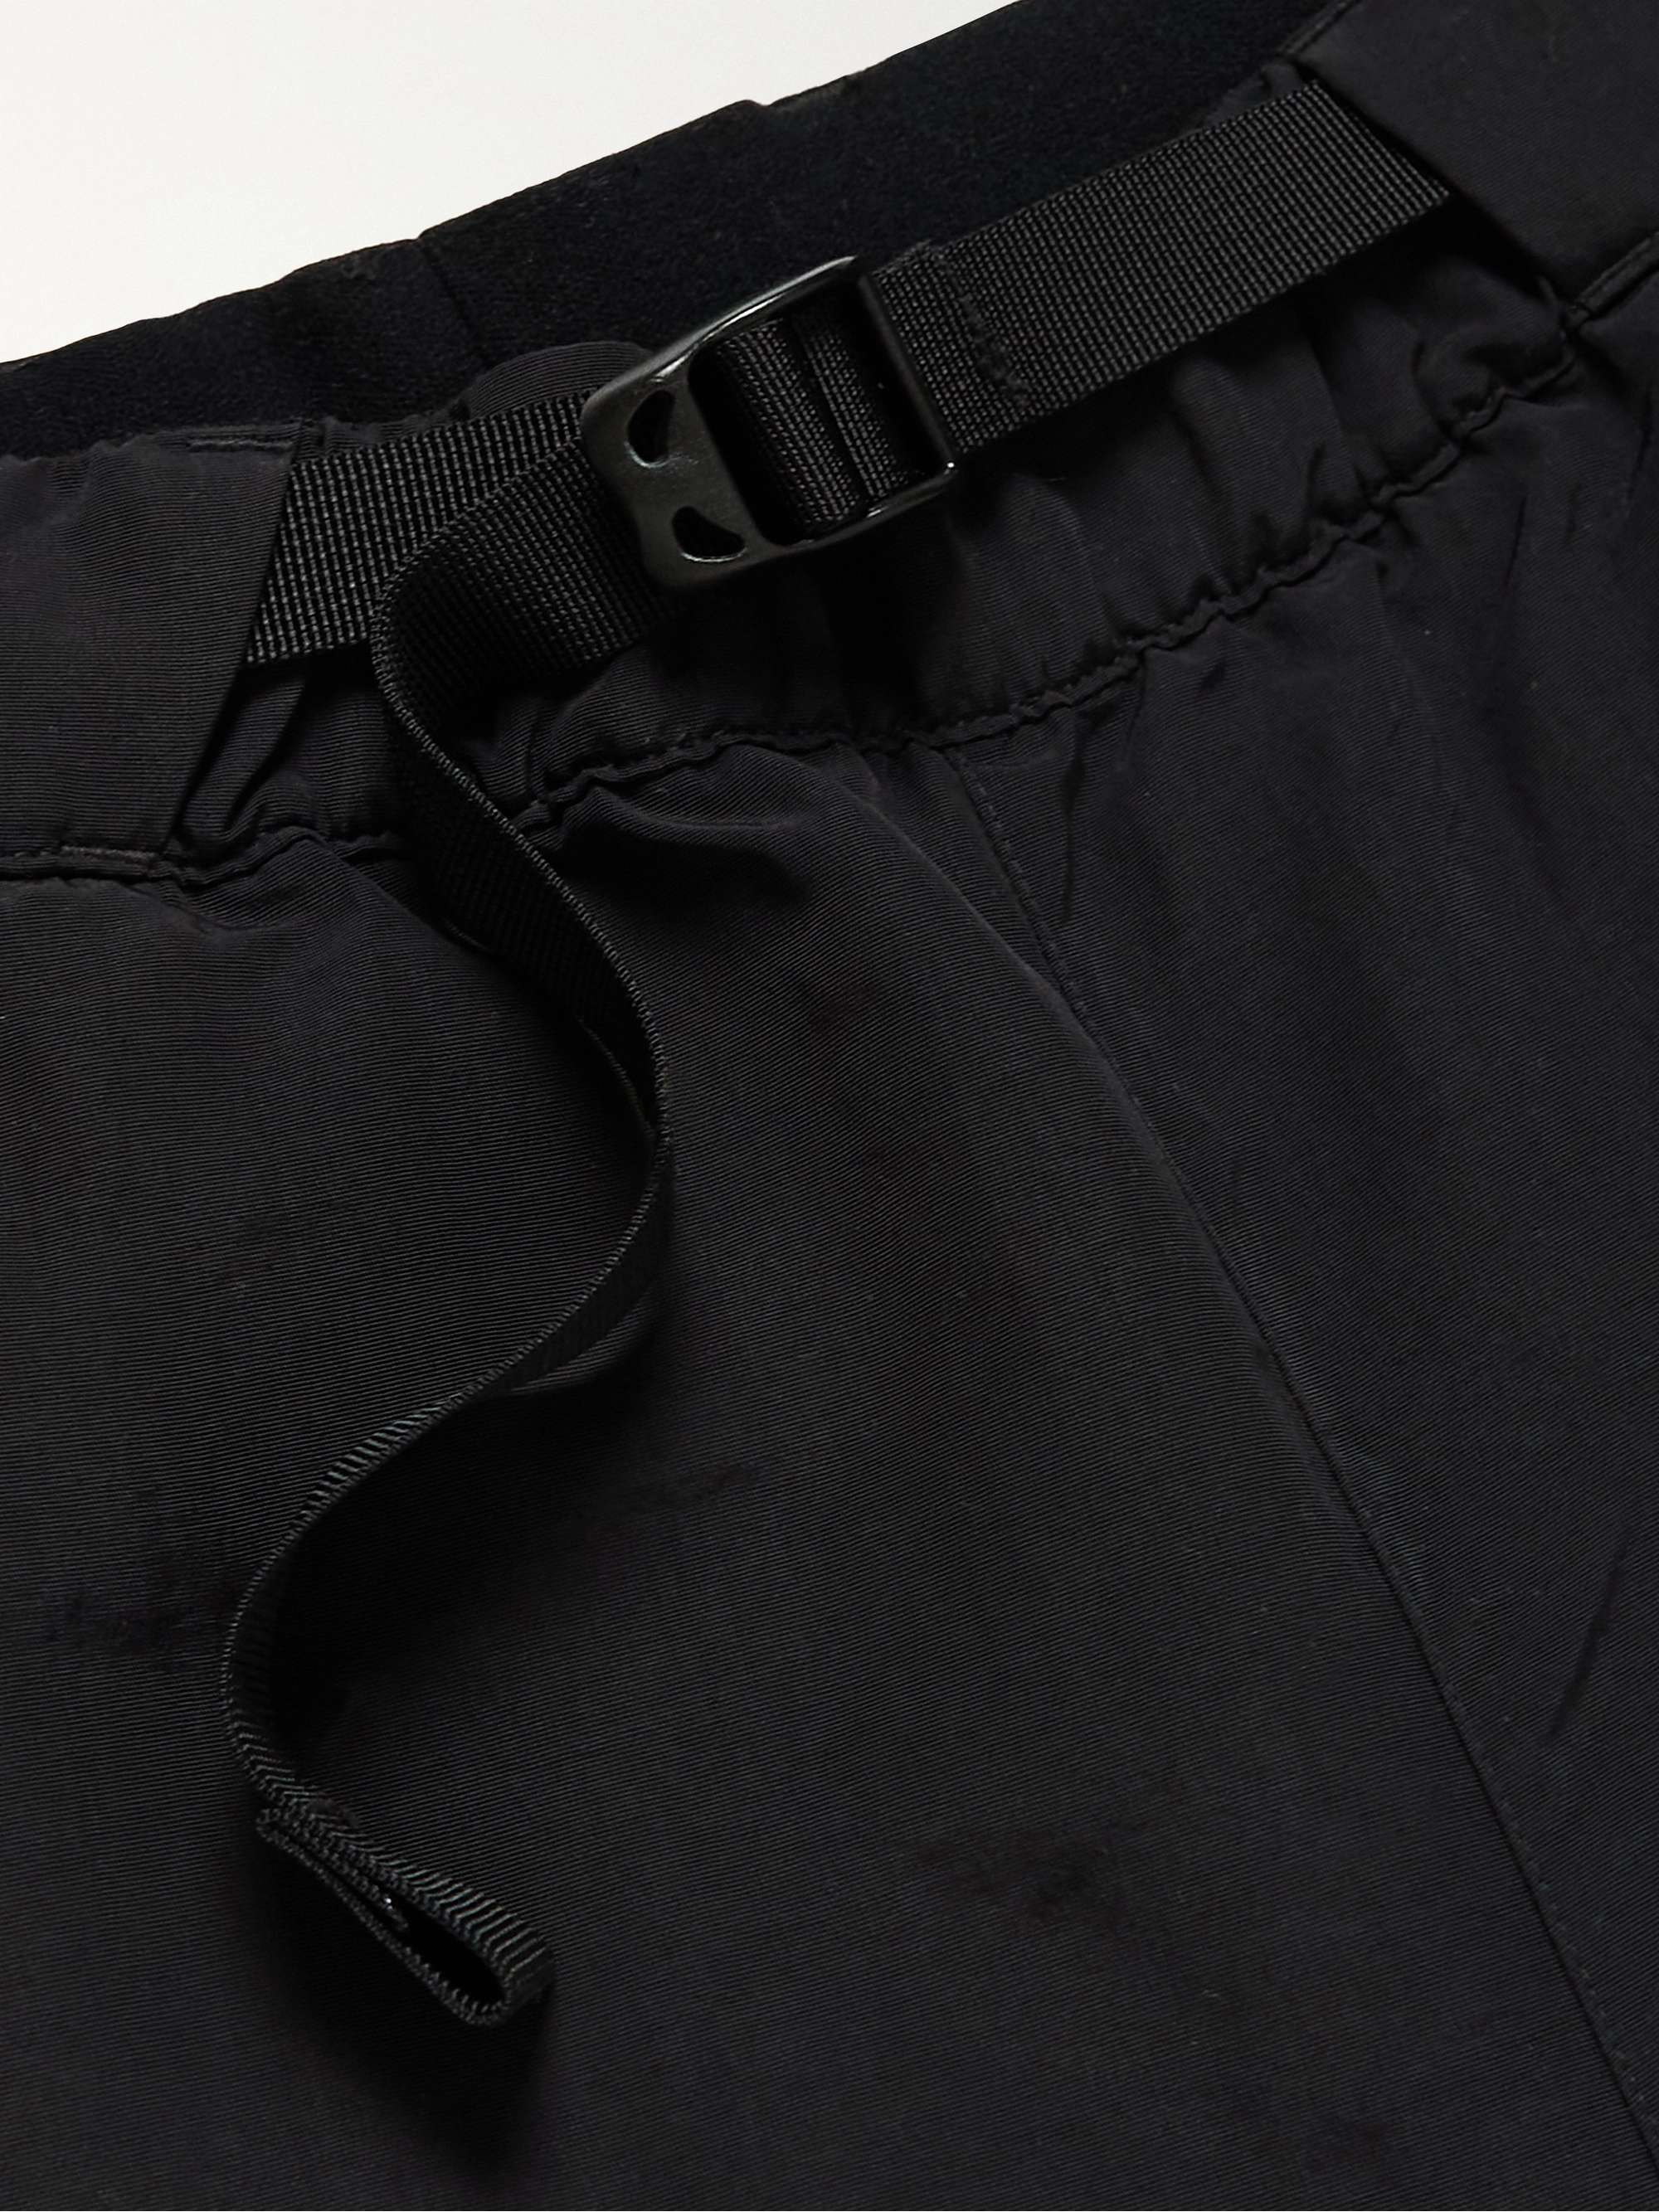 THE NORTH FACE Black Box Belted FlashDry Shorts